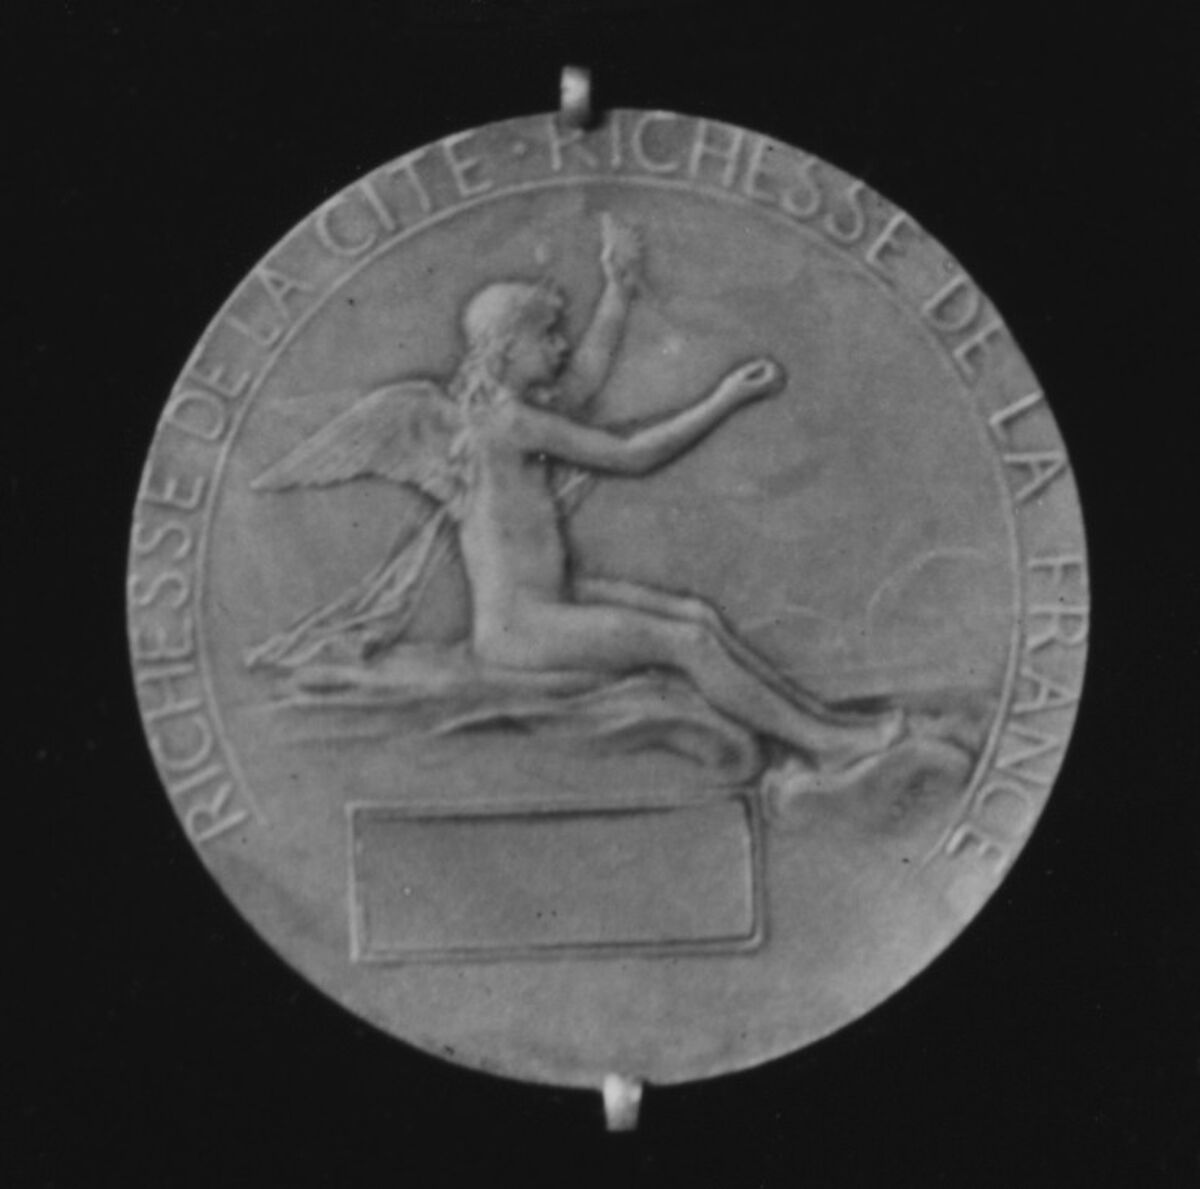 For the Lyons Chamber of Commerce, 1892, Medalist: Louis-Oscar Roty (French, Paris 1846–1911 Paris), Bronze, struck, silvered, French 